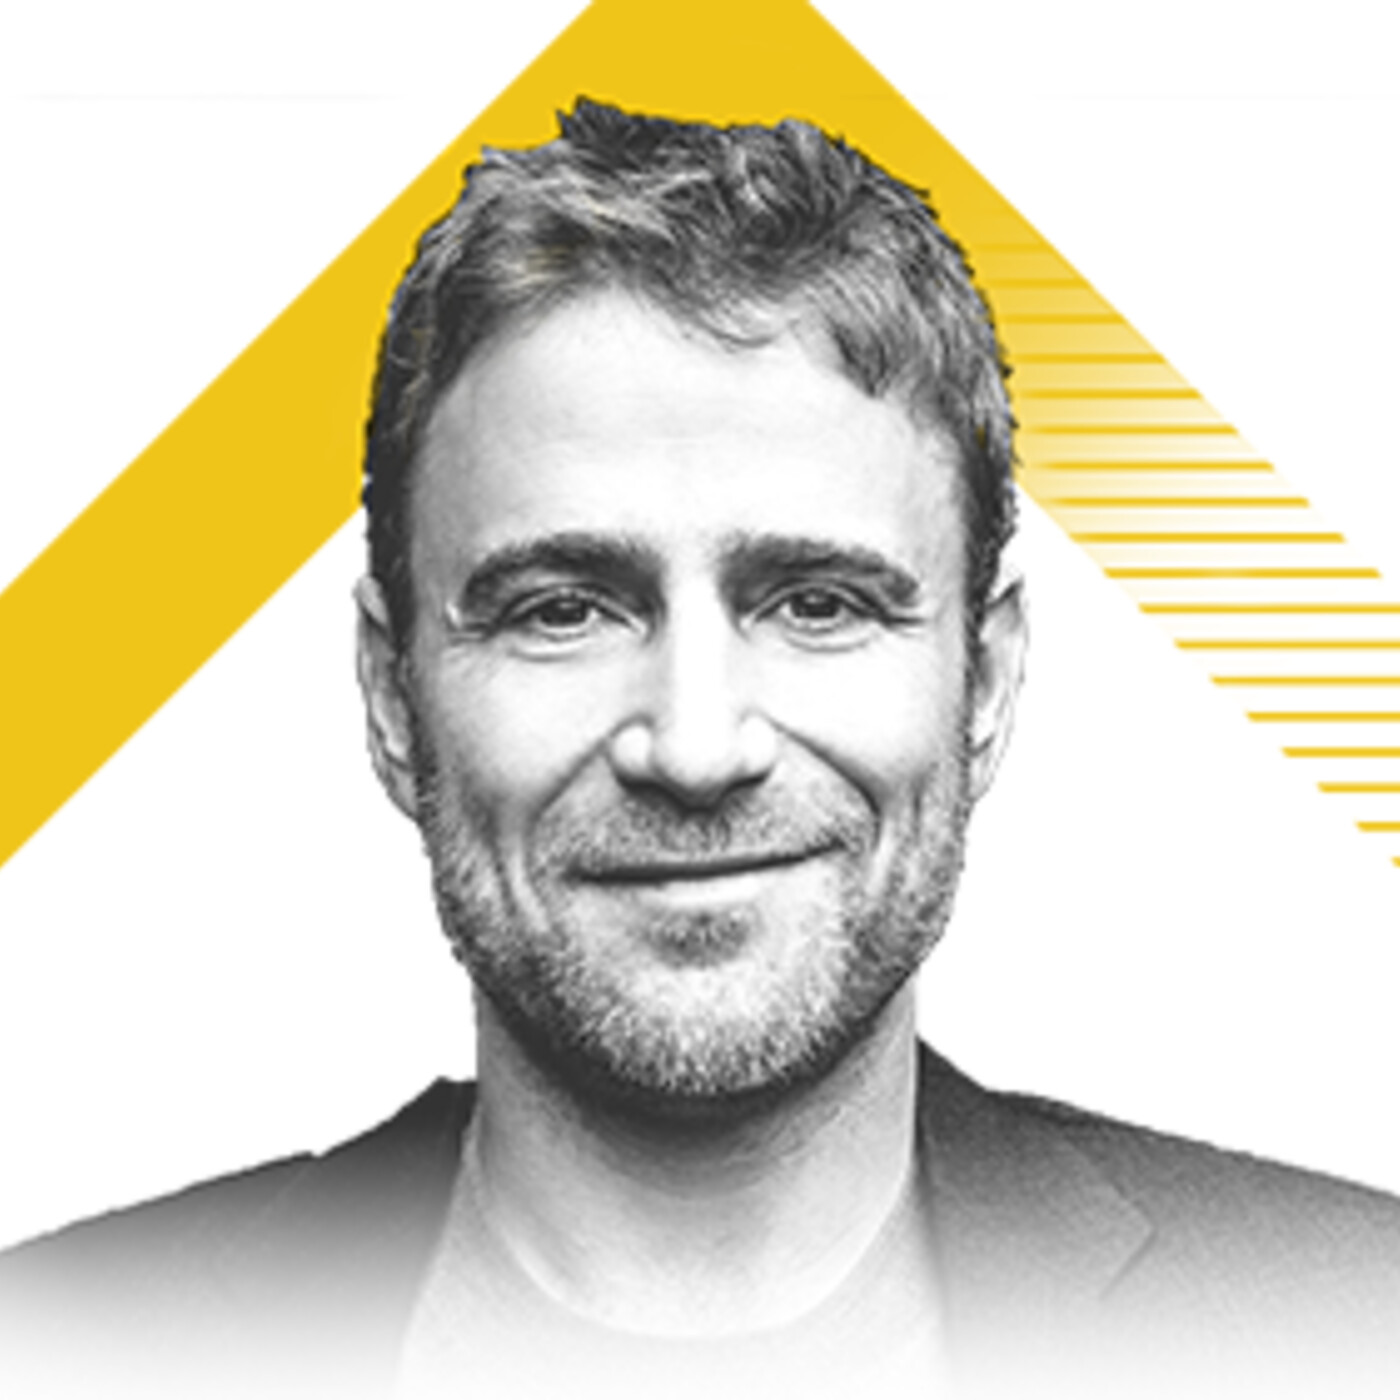 Live From The HIBT Summit: Stewart Butterfield